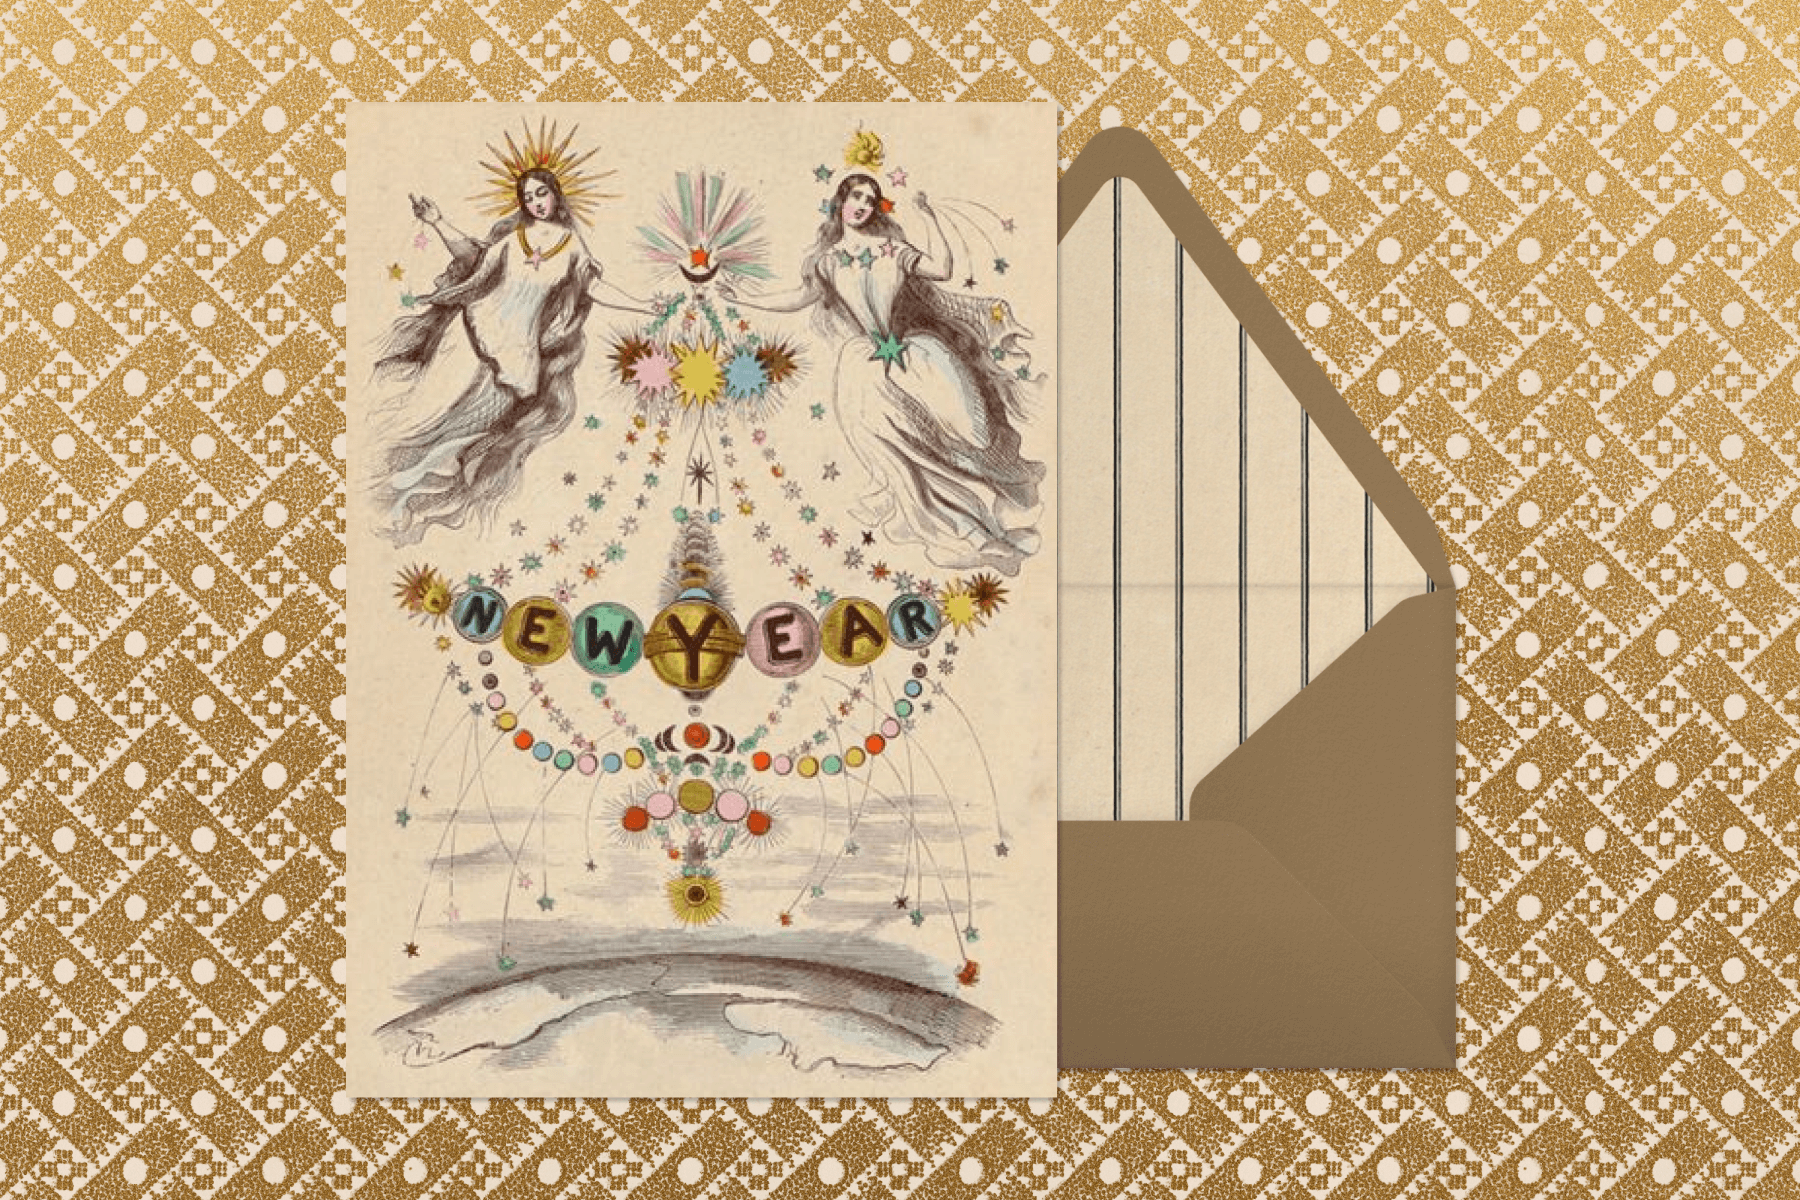 A card witha vintage drawing of angels and colorful balls in the shape of a chandelier with the words “NEW YEAR” on a gold pattern background.